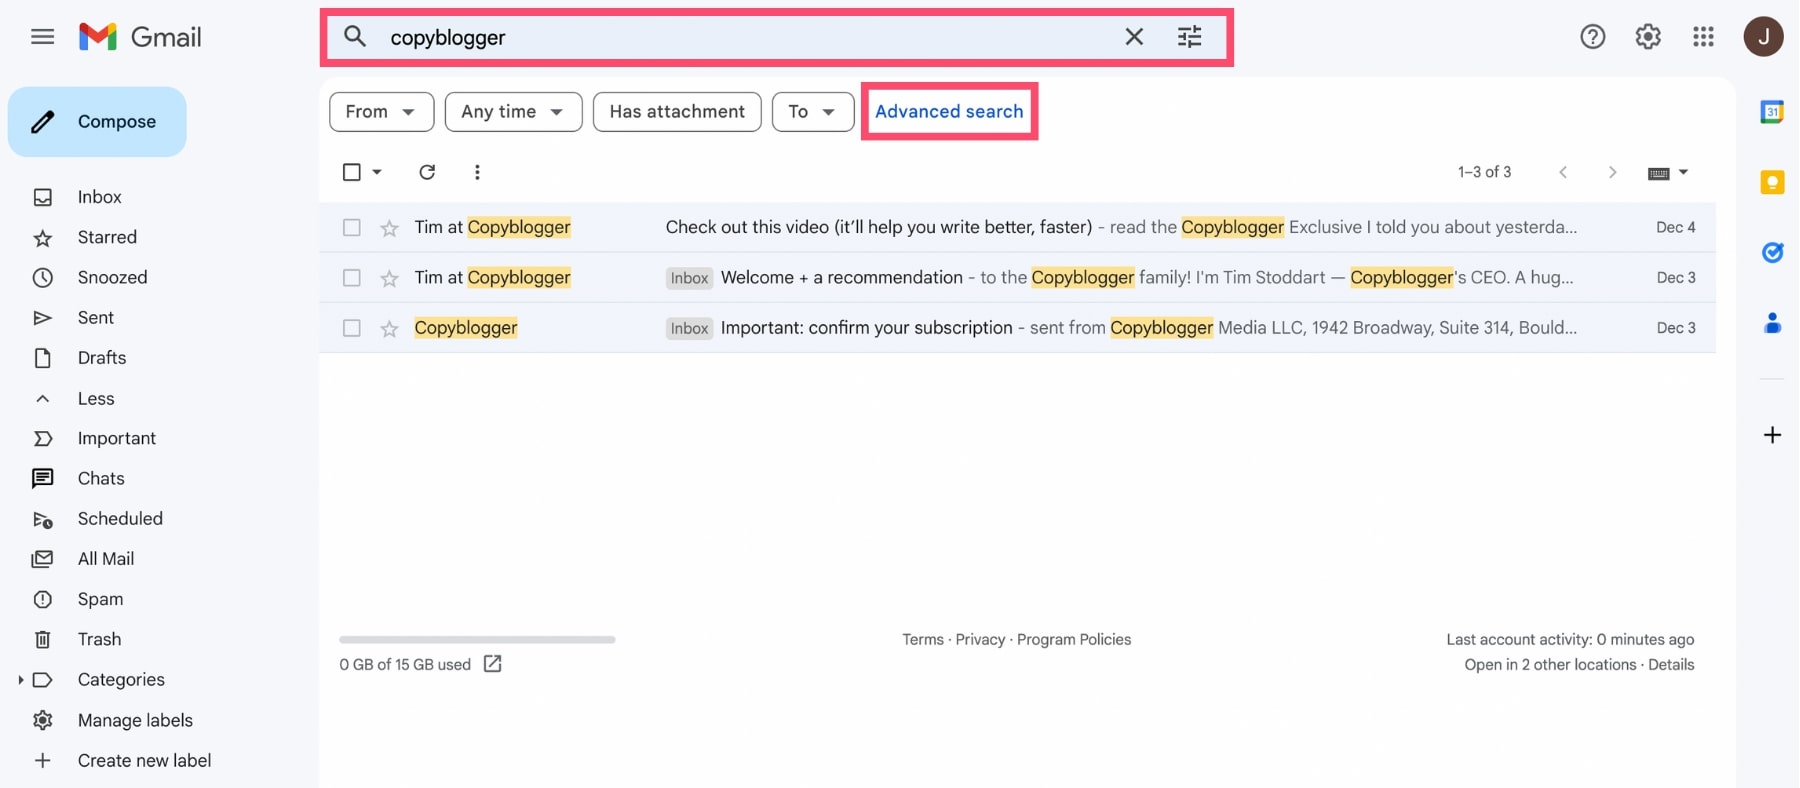 How to search for archived emails in Gmail